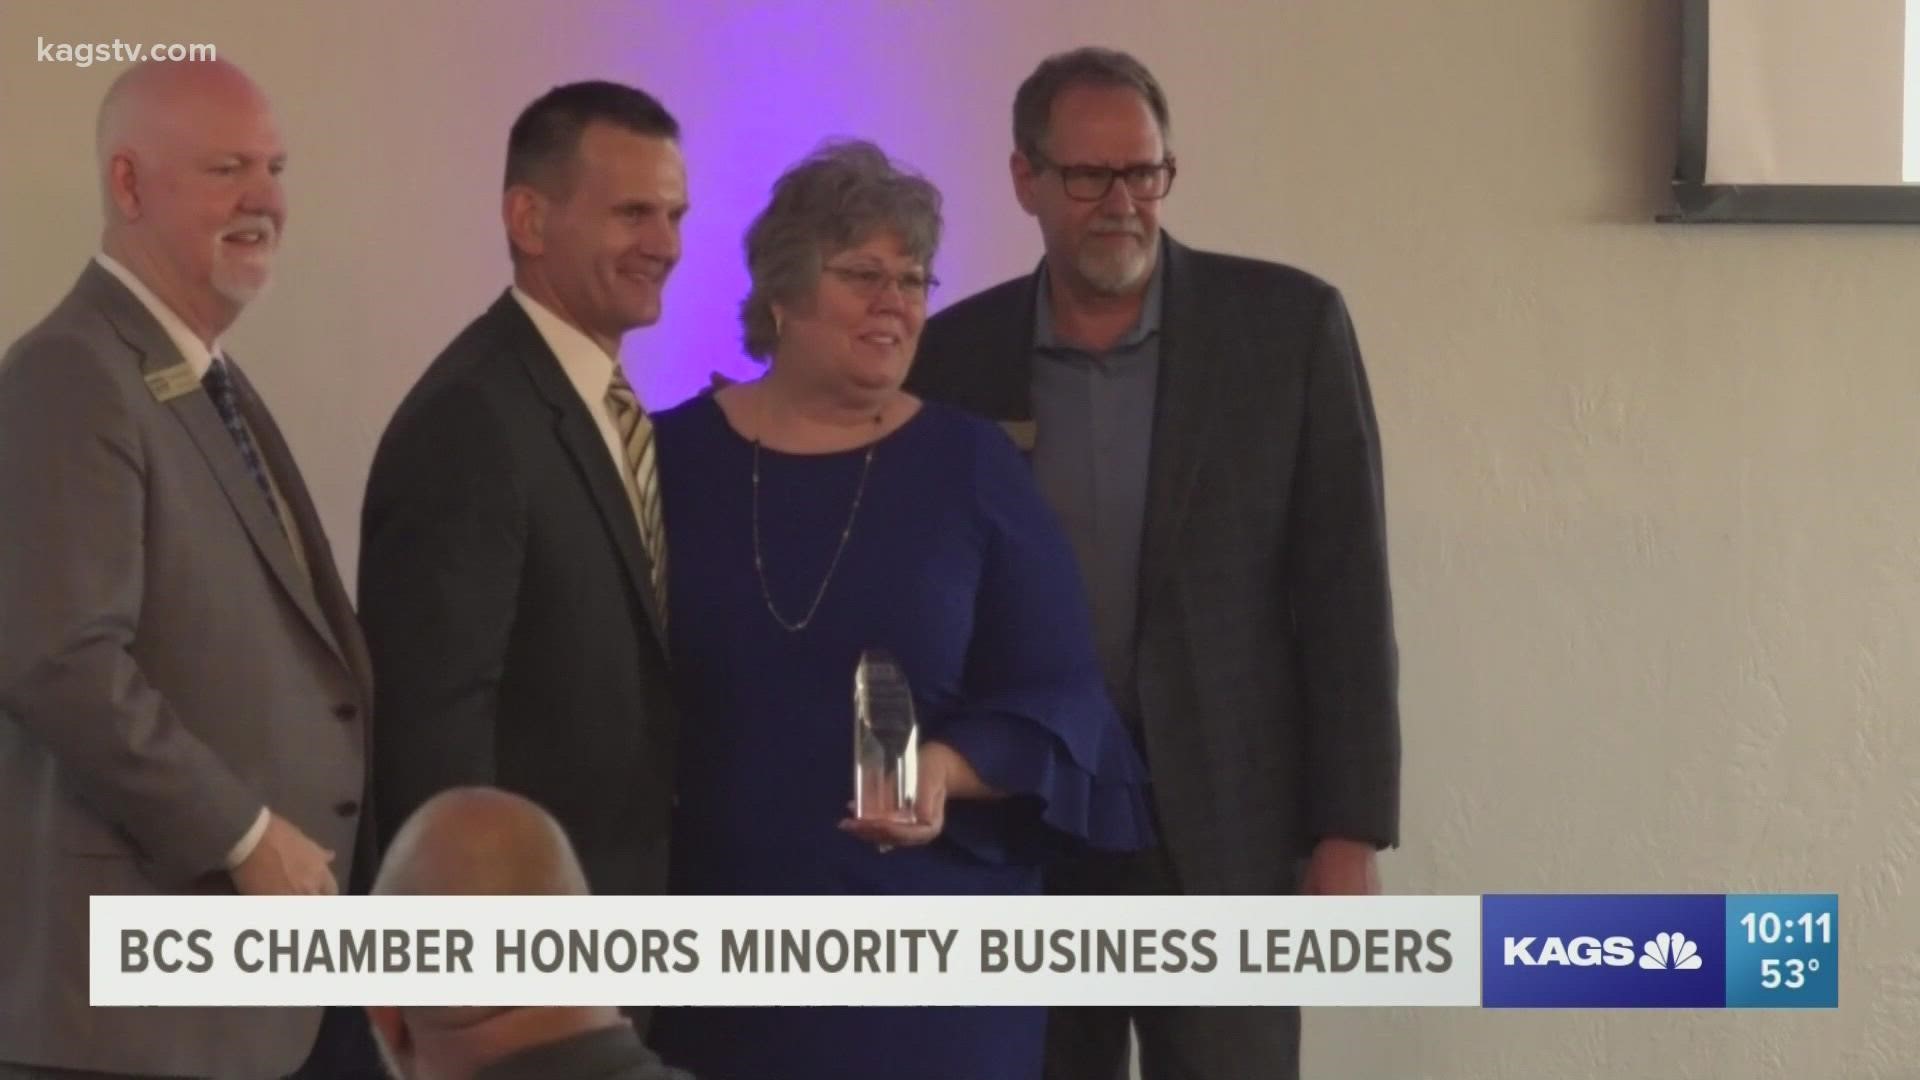 Several local businesses were honored at a special luncheon.